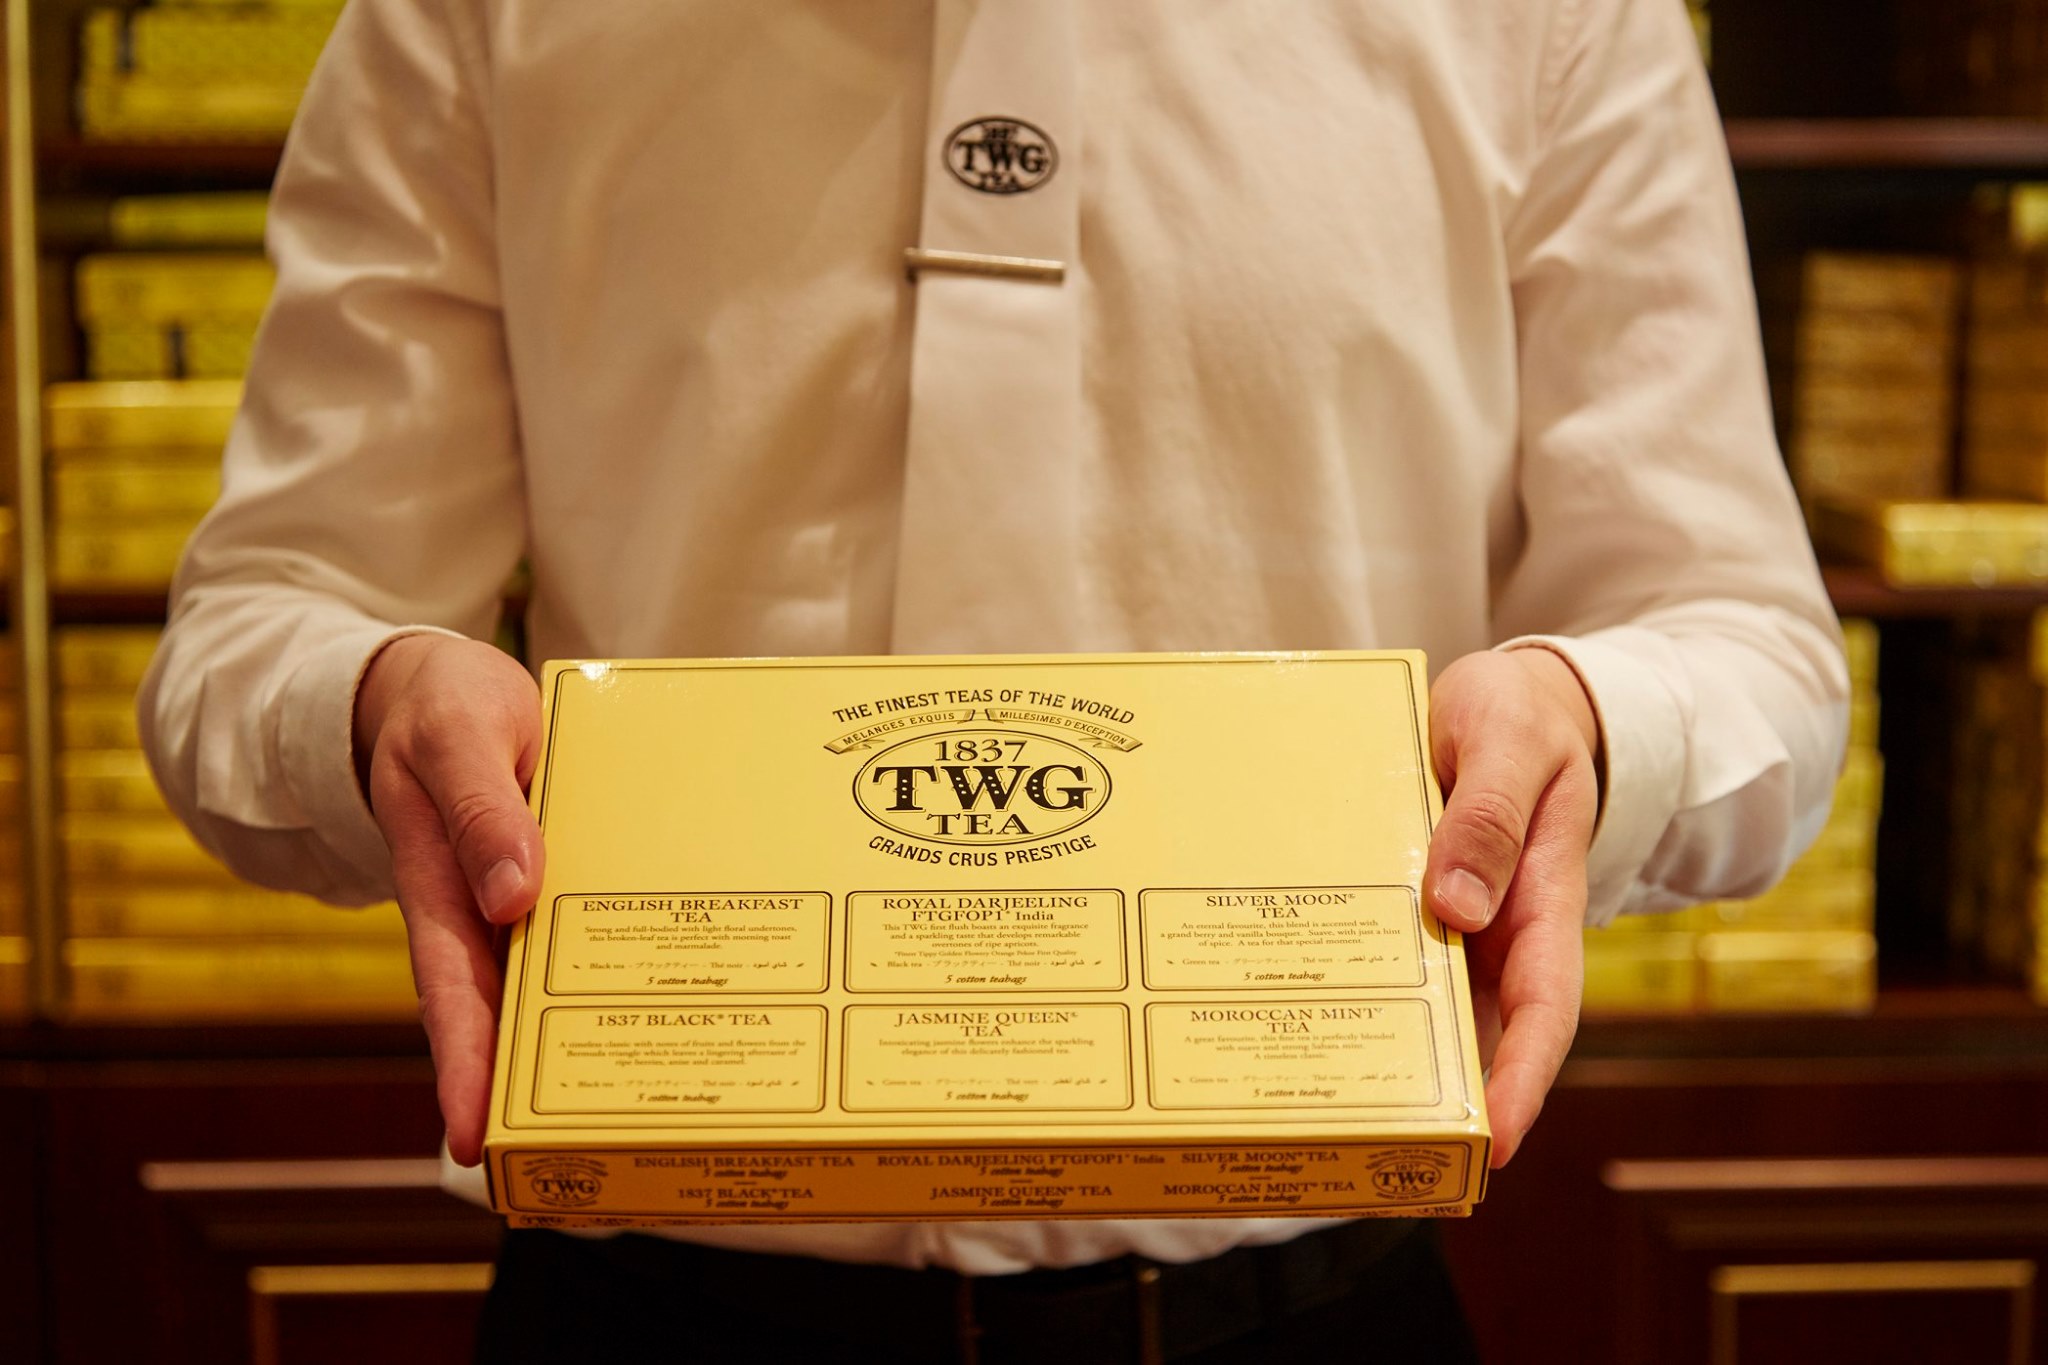 TWG Tea presents the ultimate teabag, entirely hand-sewn from 100% cotton containing 2½ grams of whole-leaf fine harvests and exclusive tea blends. This classic teabag assortment includes English Breakfast Tea, 1837 Black Tea, Royal Darjeeling FTGFOP1, Silver Moon Tea, Jasmine Queen Tea and Moroccan Mint Tea, displayed in a magnificent gift box. Shop now at TWGTea.Com.